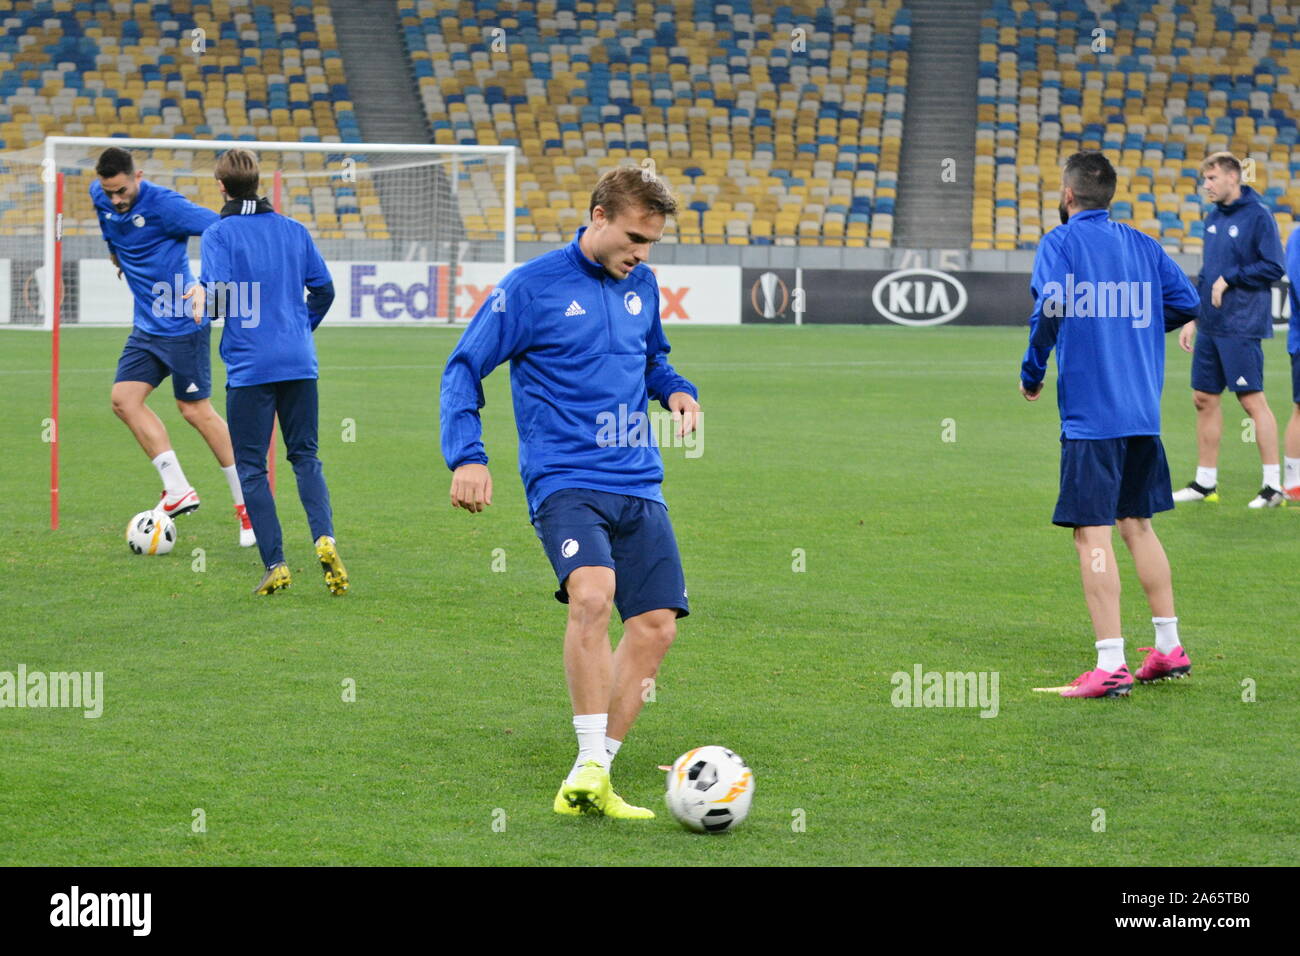 Kiev, Ukraine. 23rd Oct, 2019. KYIV, UKRAINE - OCTOBER 23, 2019: Copenhagen's players training before the match between FC Dynamo with F.C. Copenhagen in the UEFA Europa League at the Olympic stadium (Photo by Aleksandr Gusev/Pacific Press) Credit: Pacific Press Agency/Alamy Live News Stock Photo